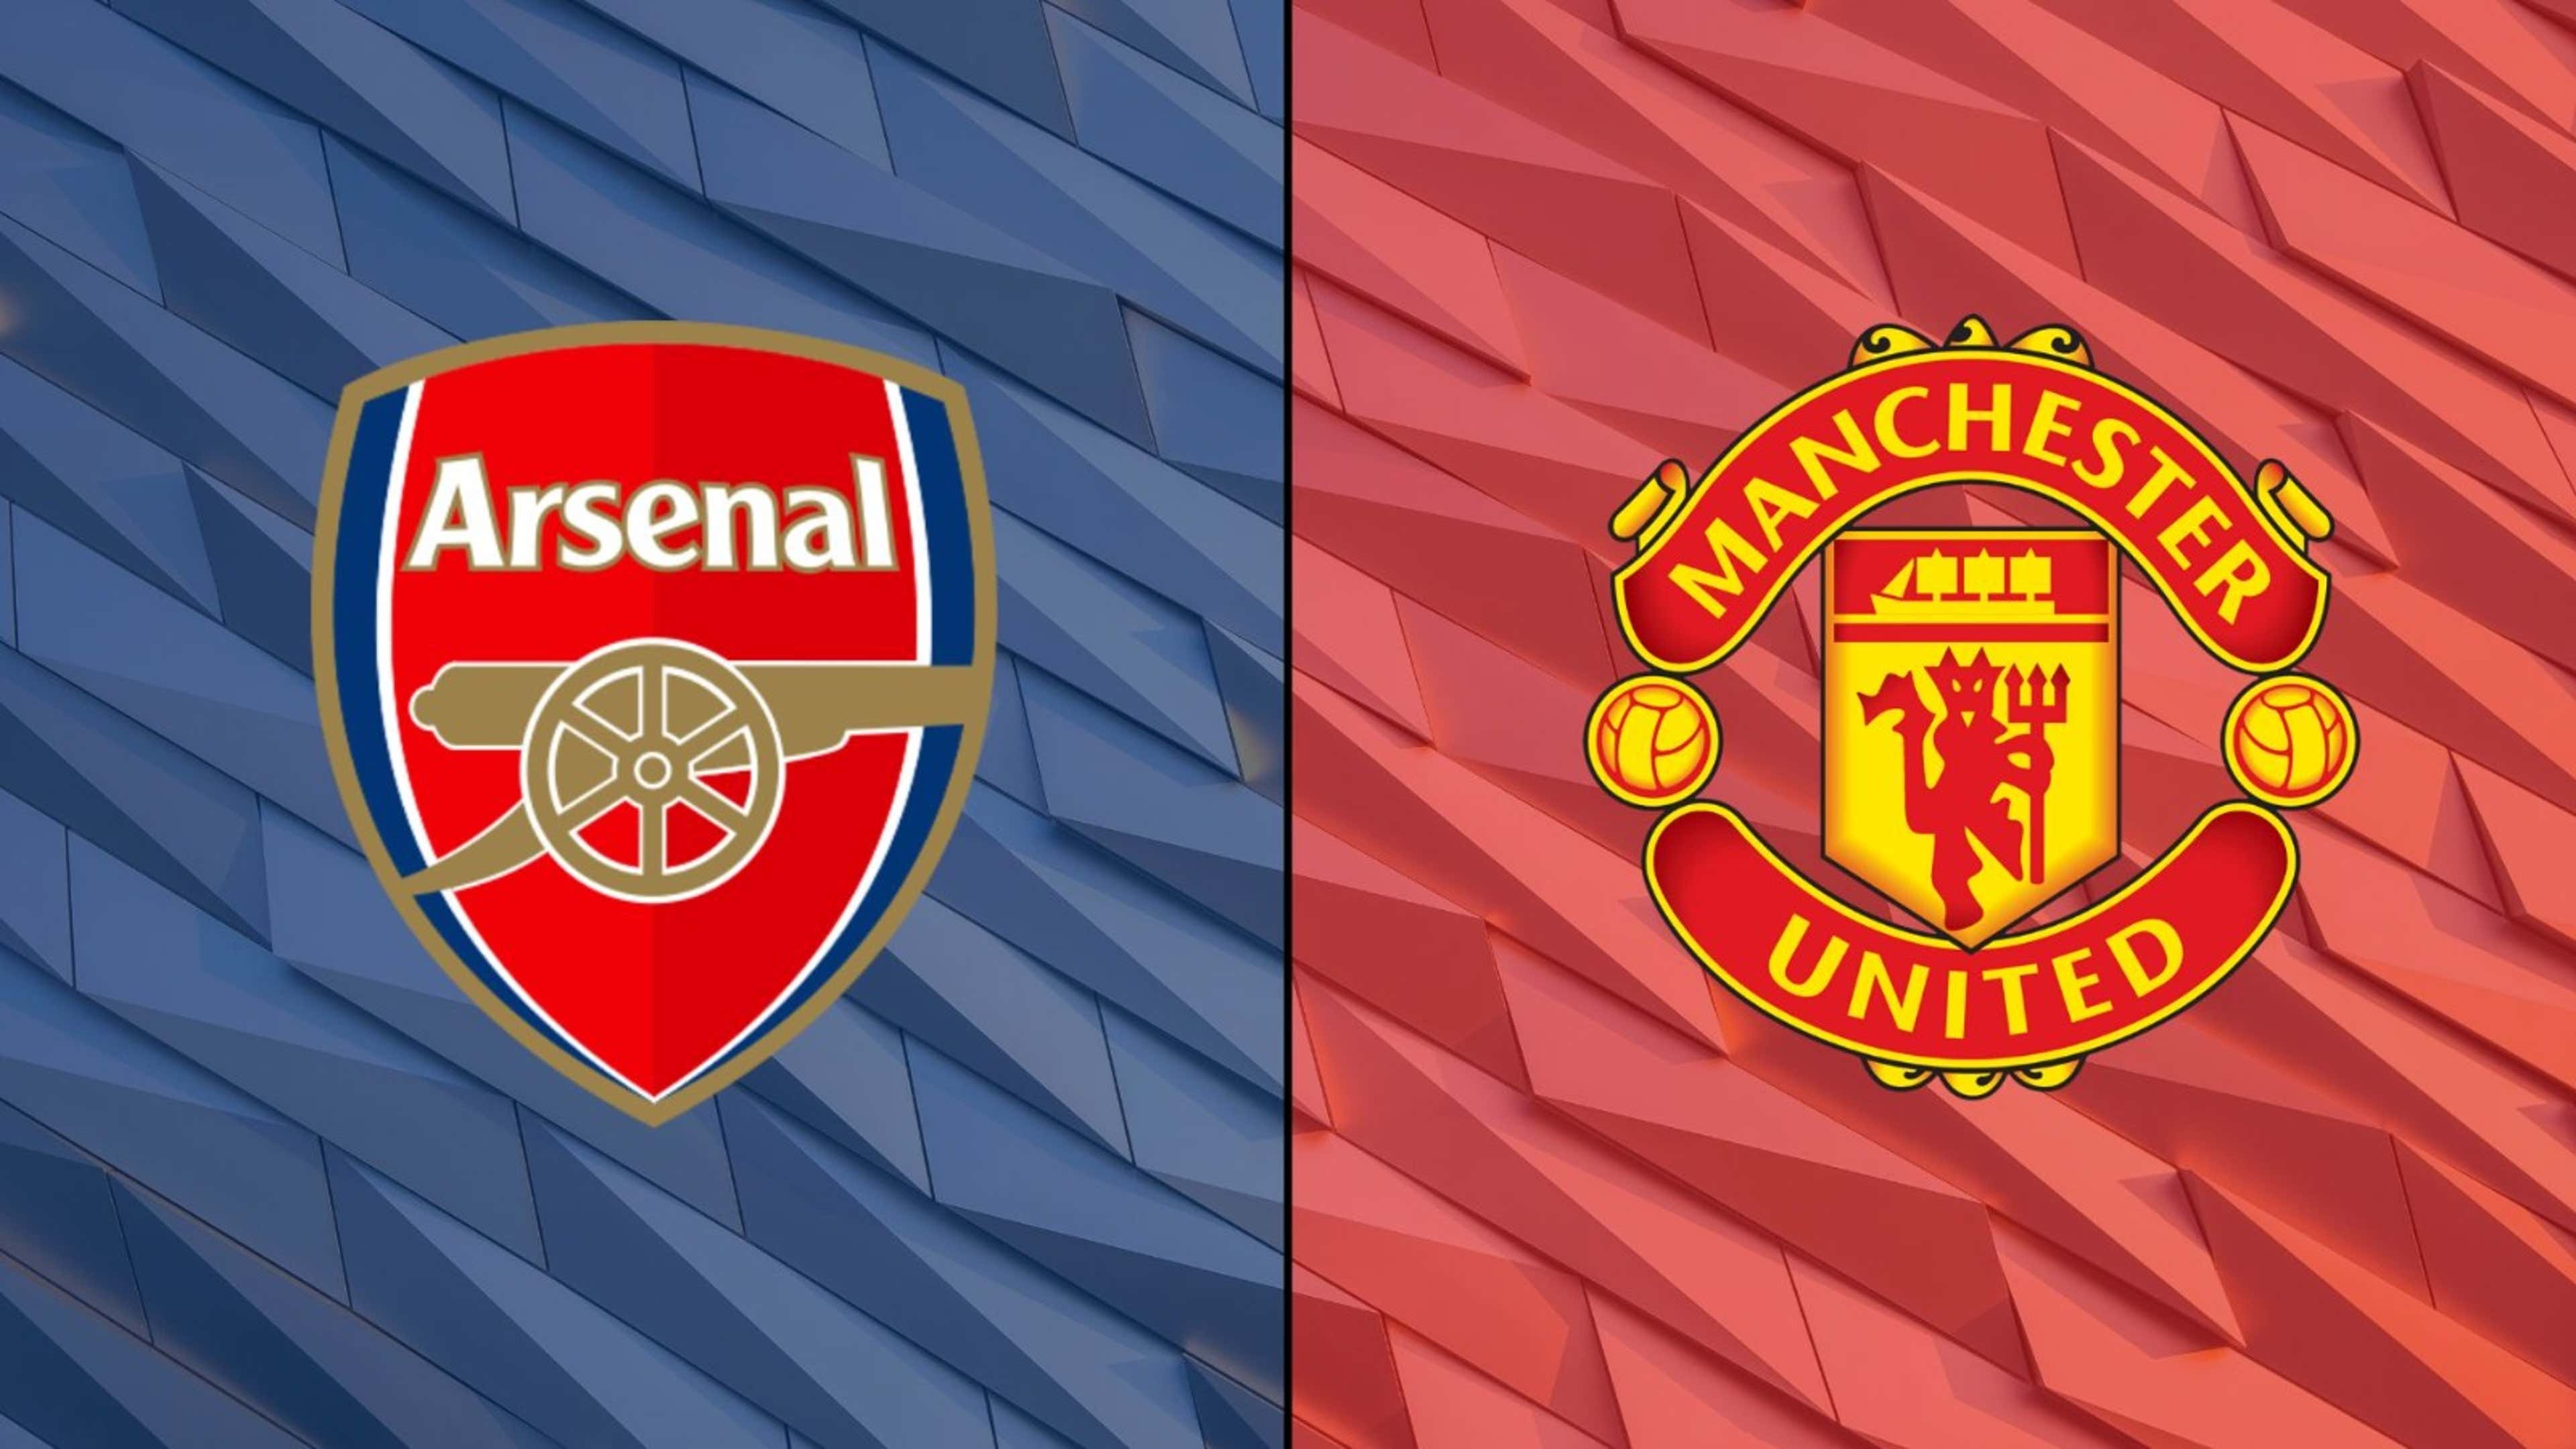 Arsenal contra manchester united